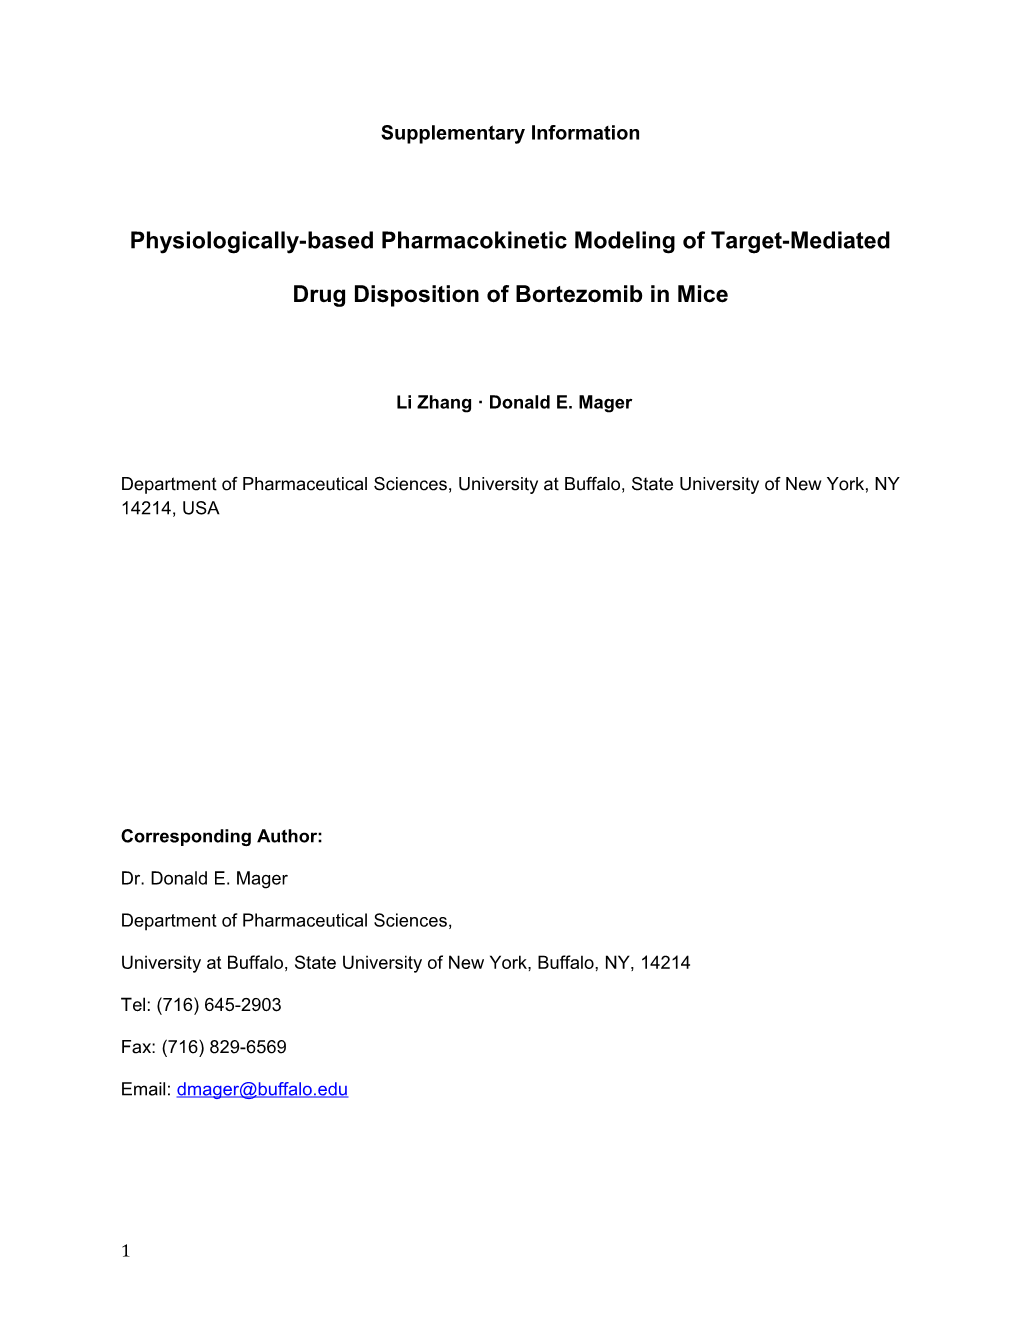 Physiologically-Based Pharmacokinetic Modeling of Target-Mediated Drug Disposition Of